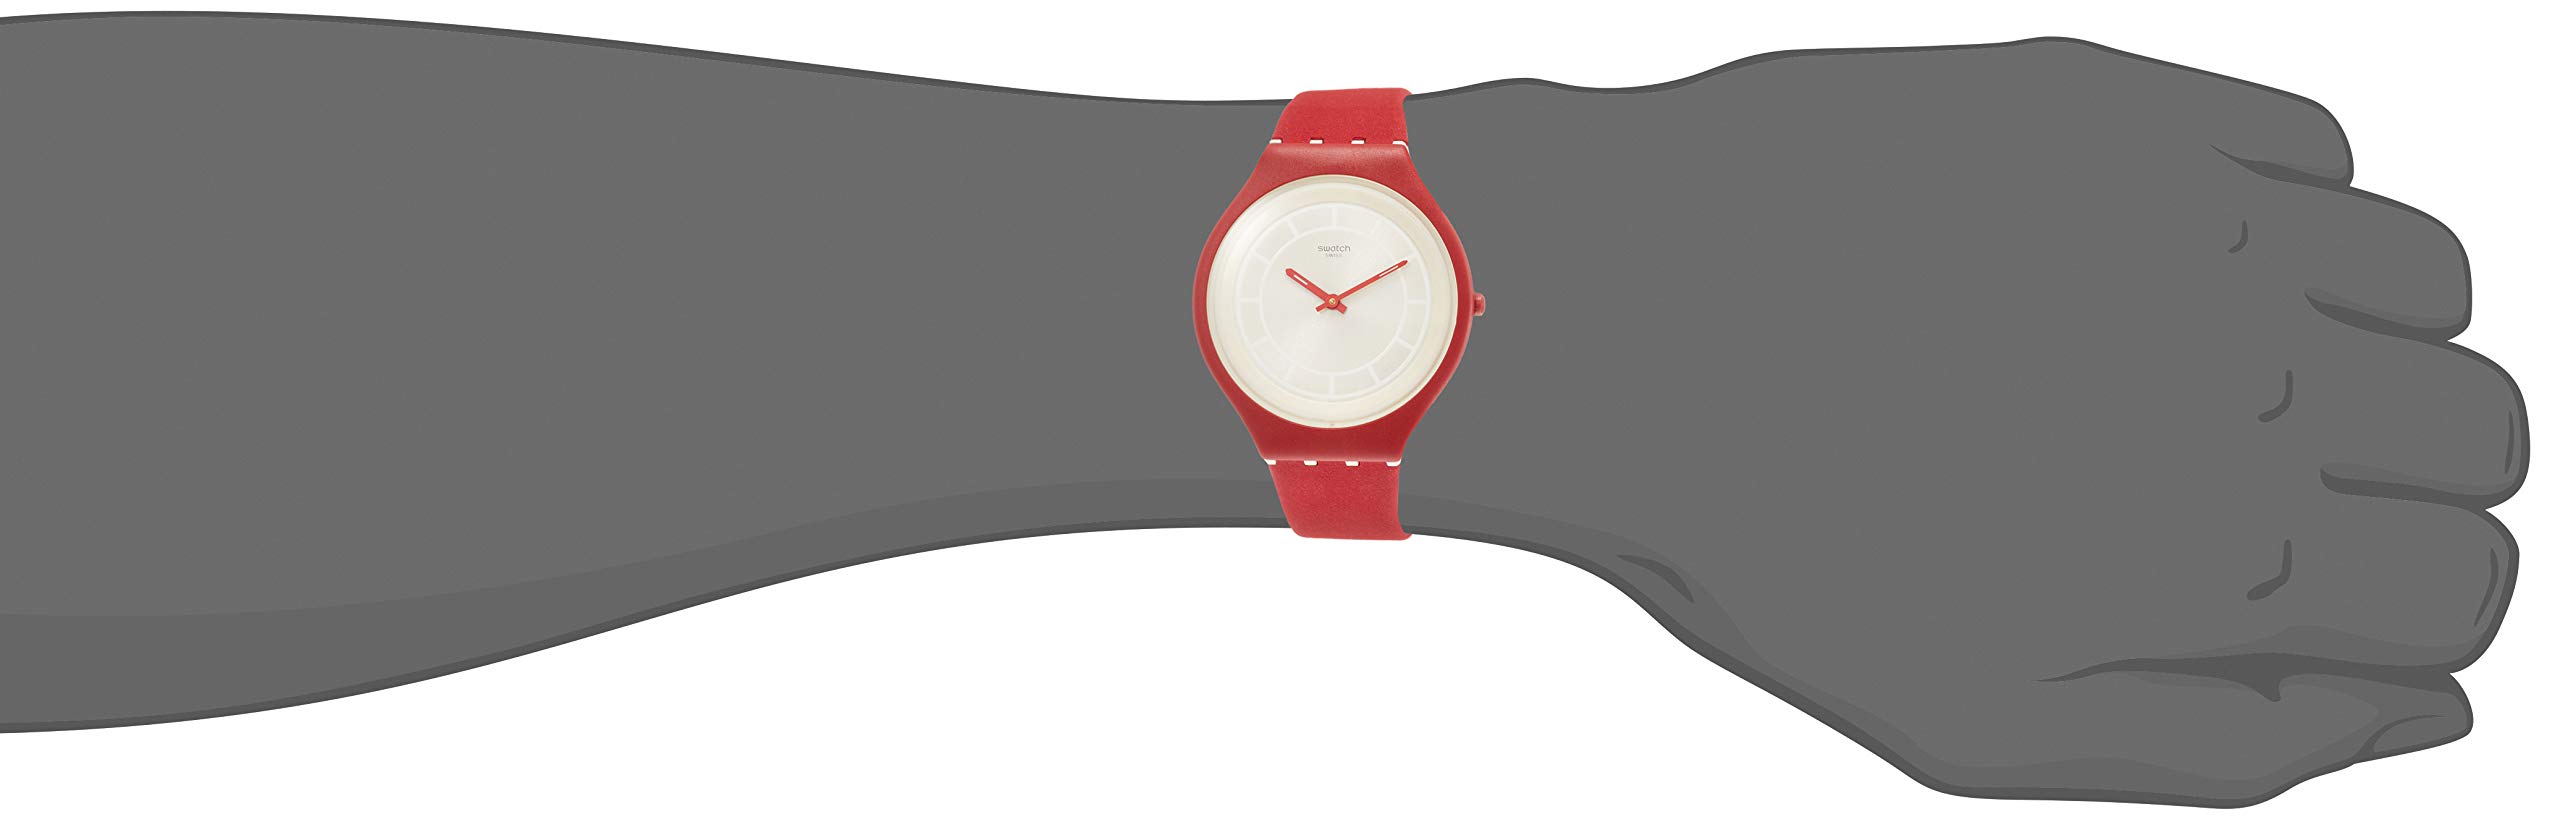 Swatch Women's Analogue Quartz Watch with Leather Strap SVUR100